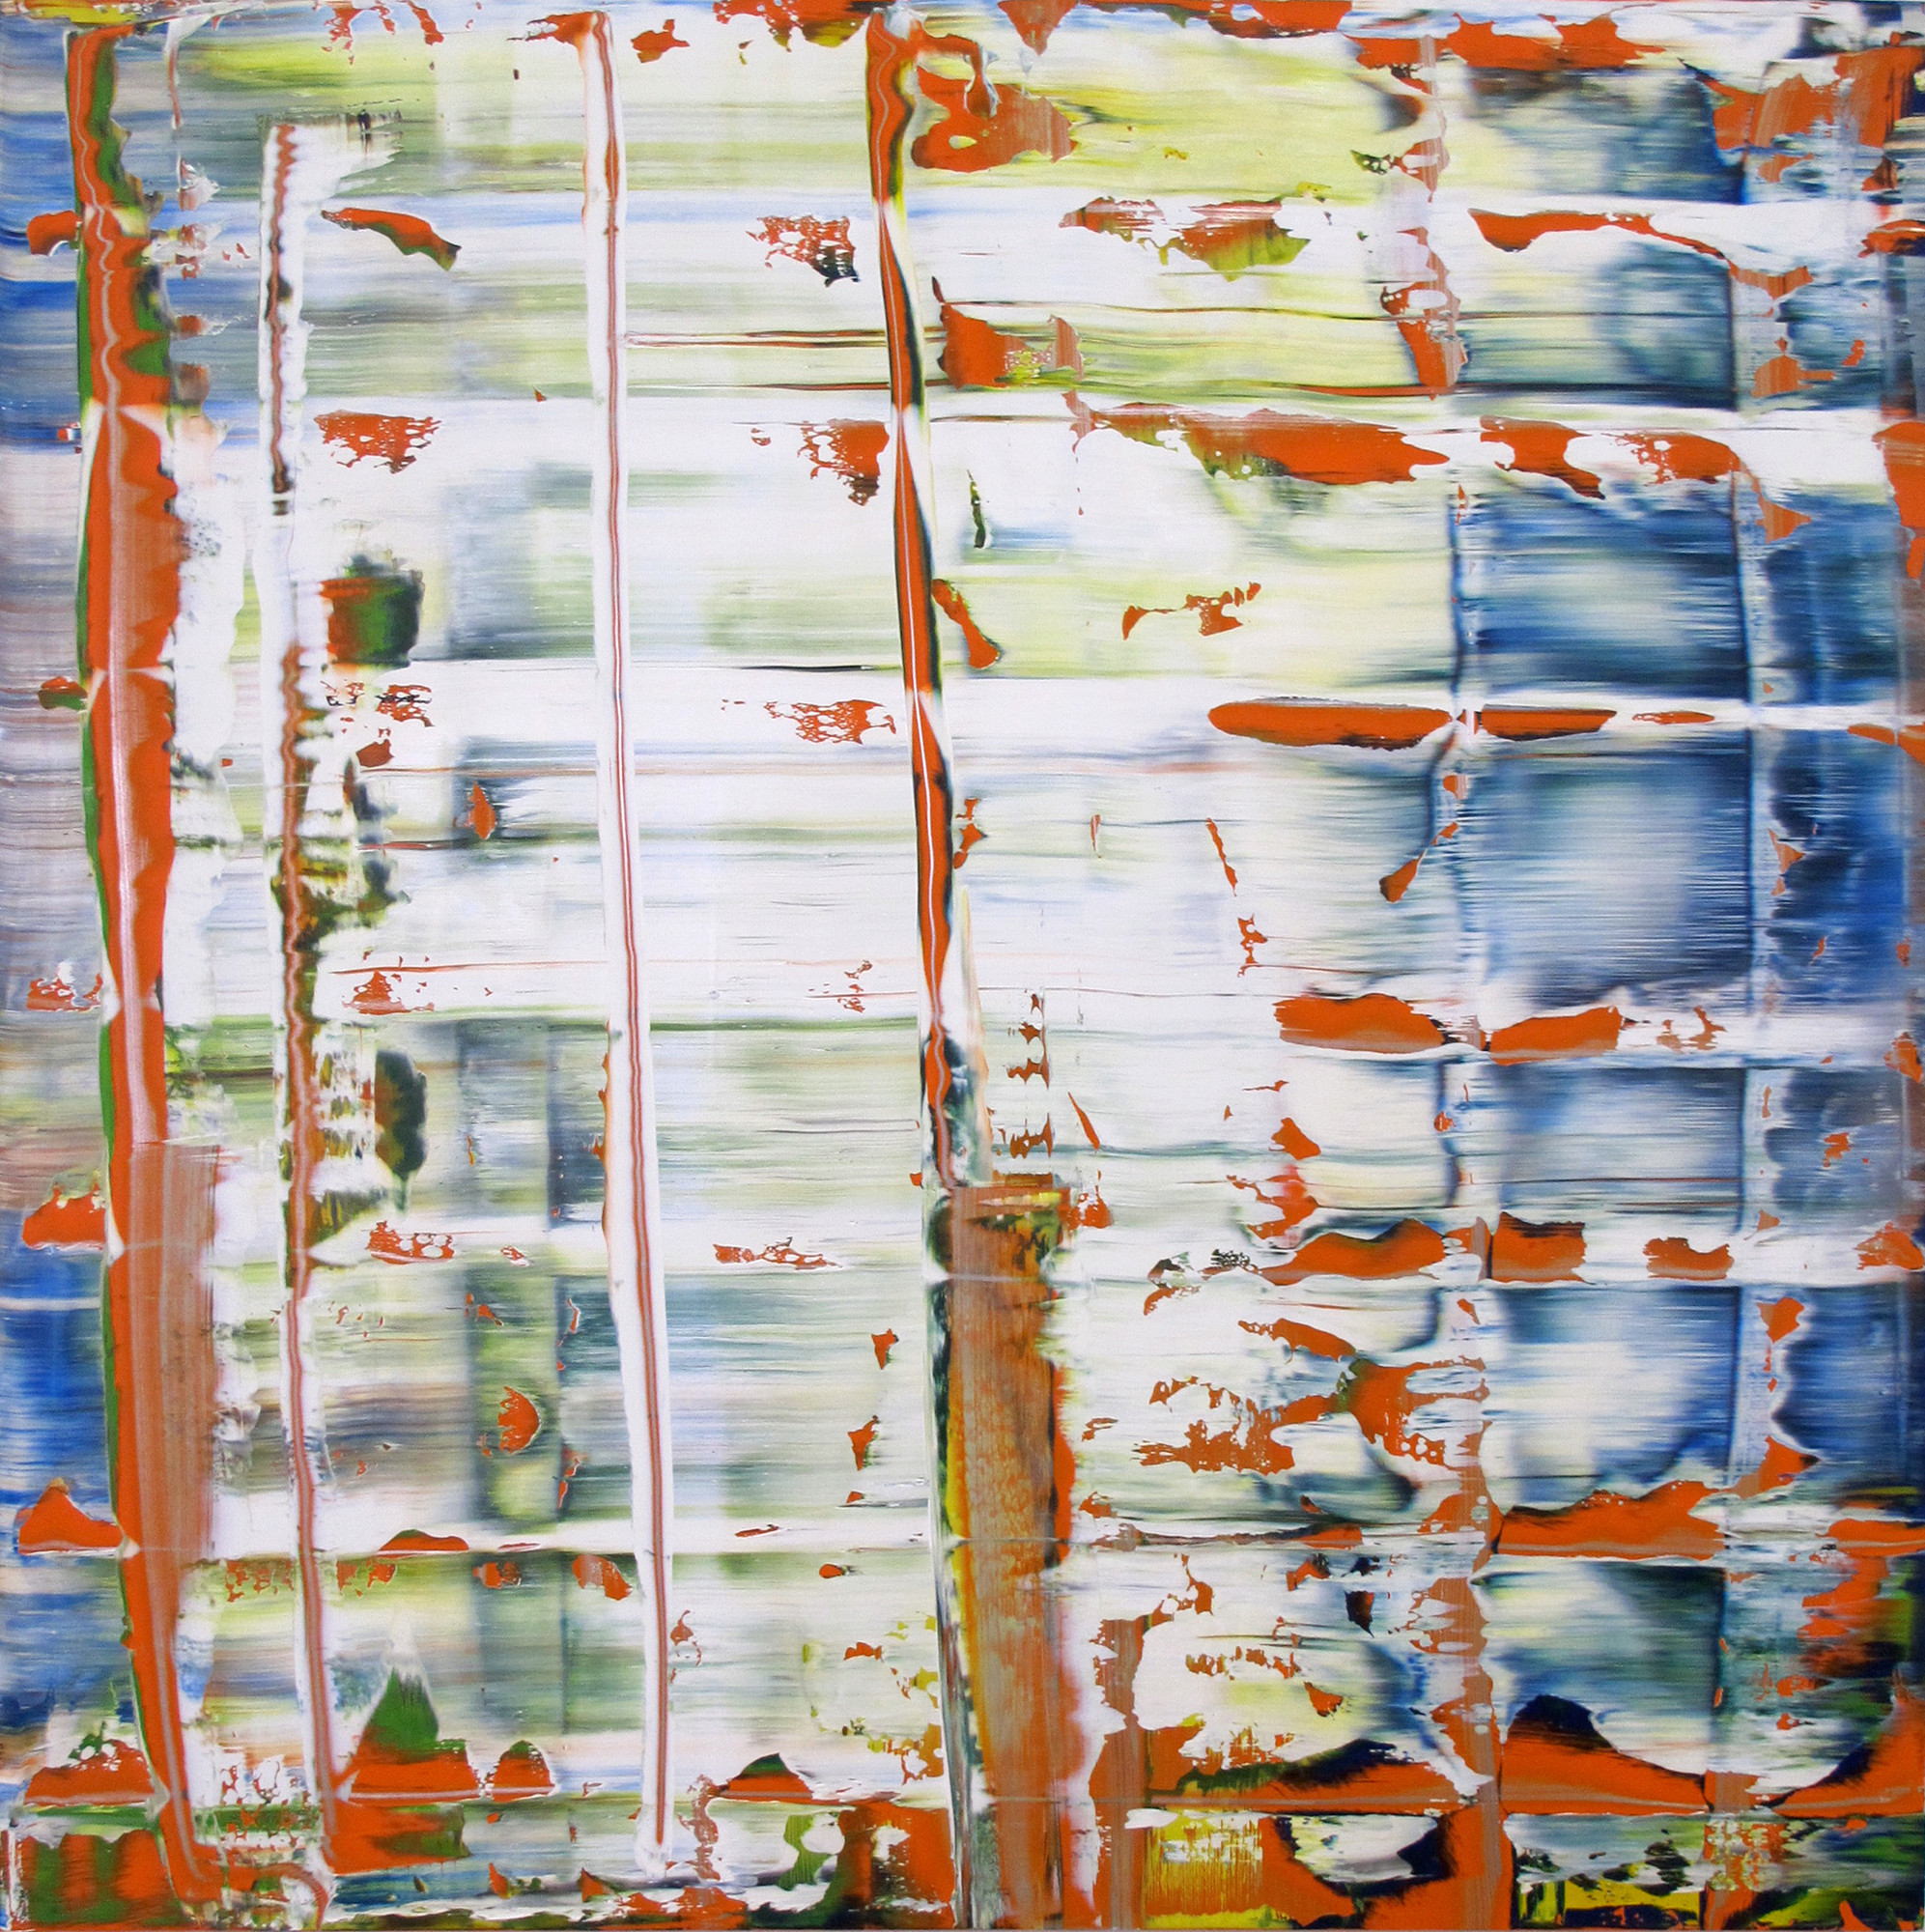 Gerhard Richter: Forty Years of Painting | MoMA